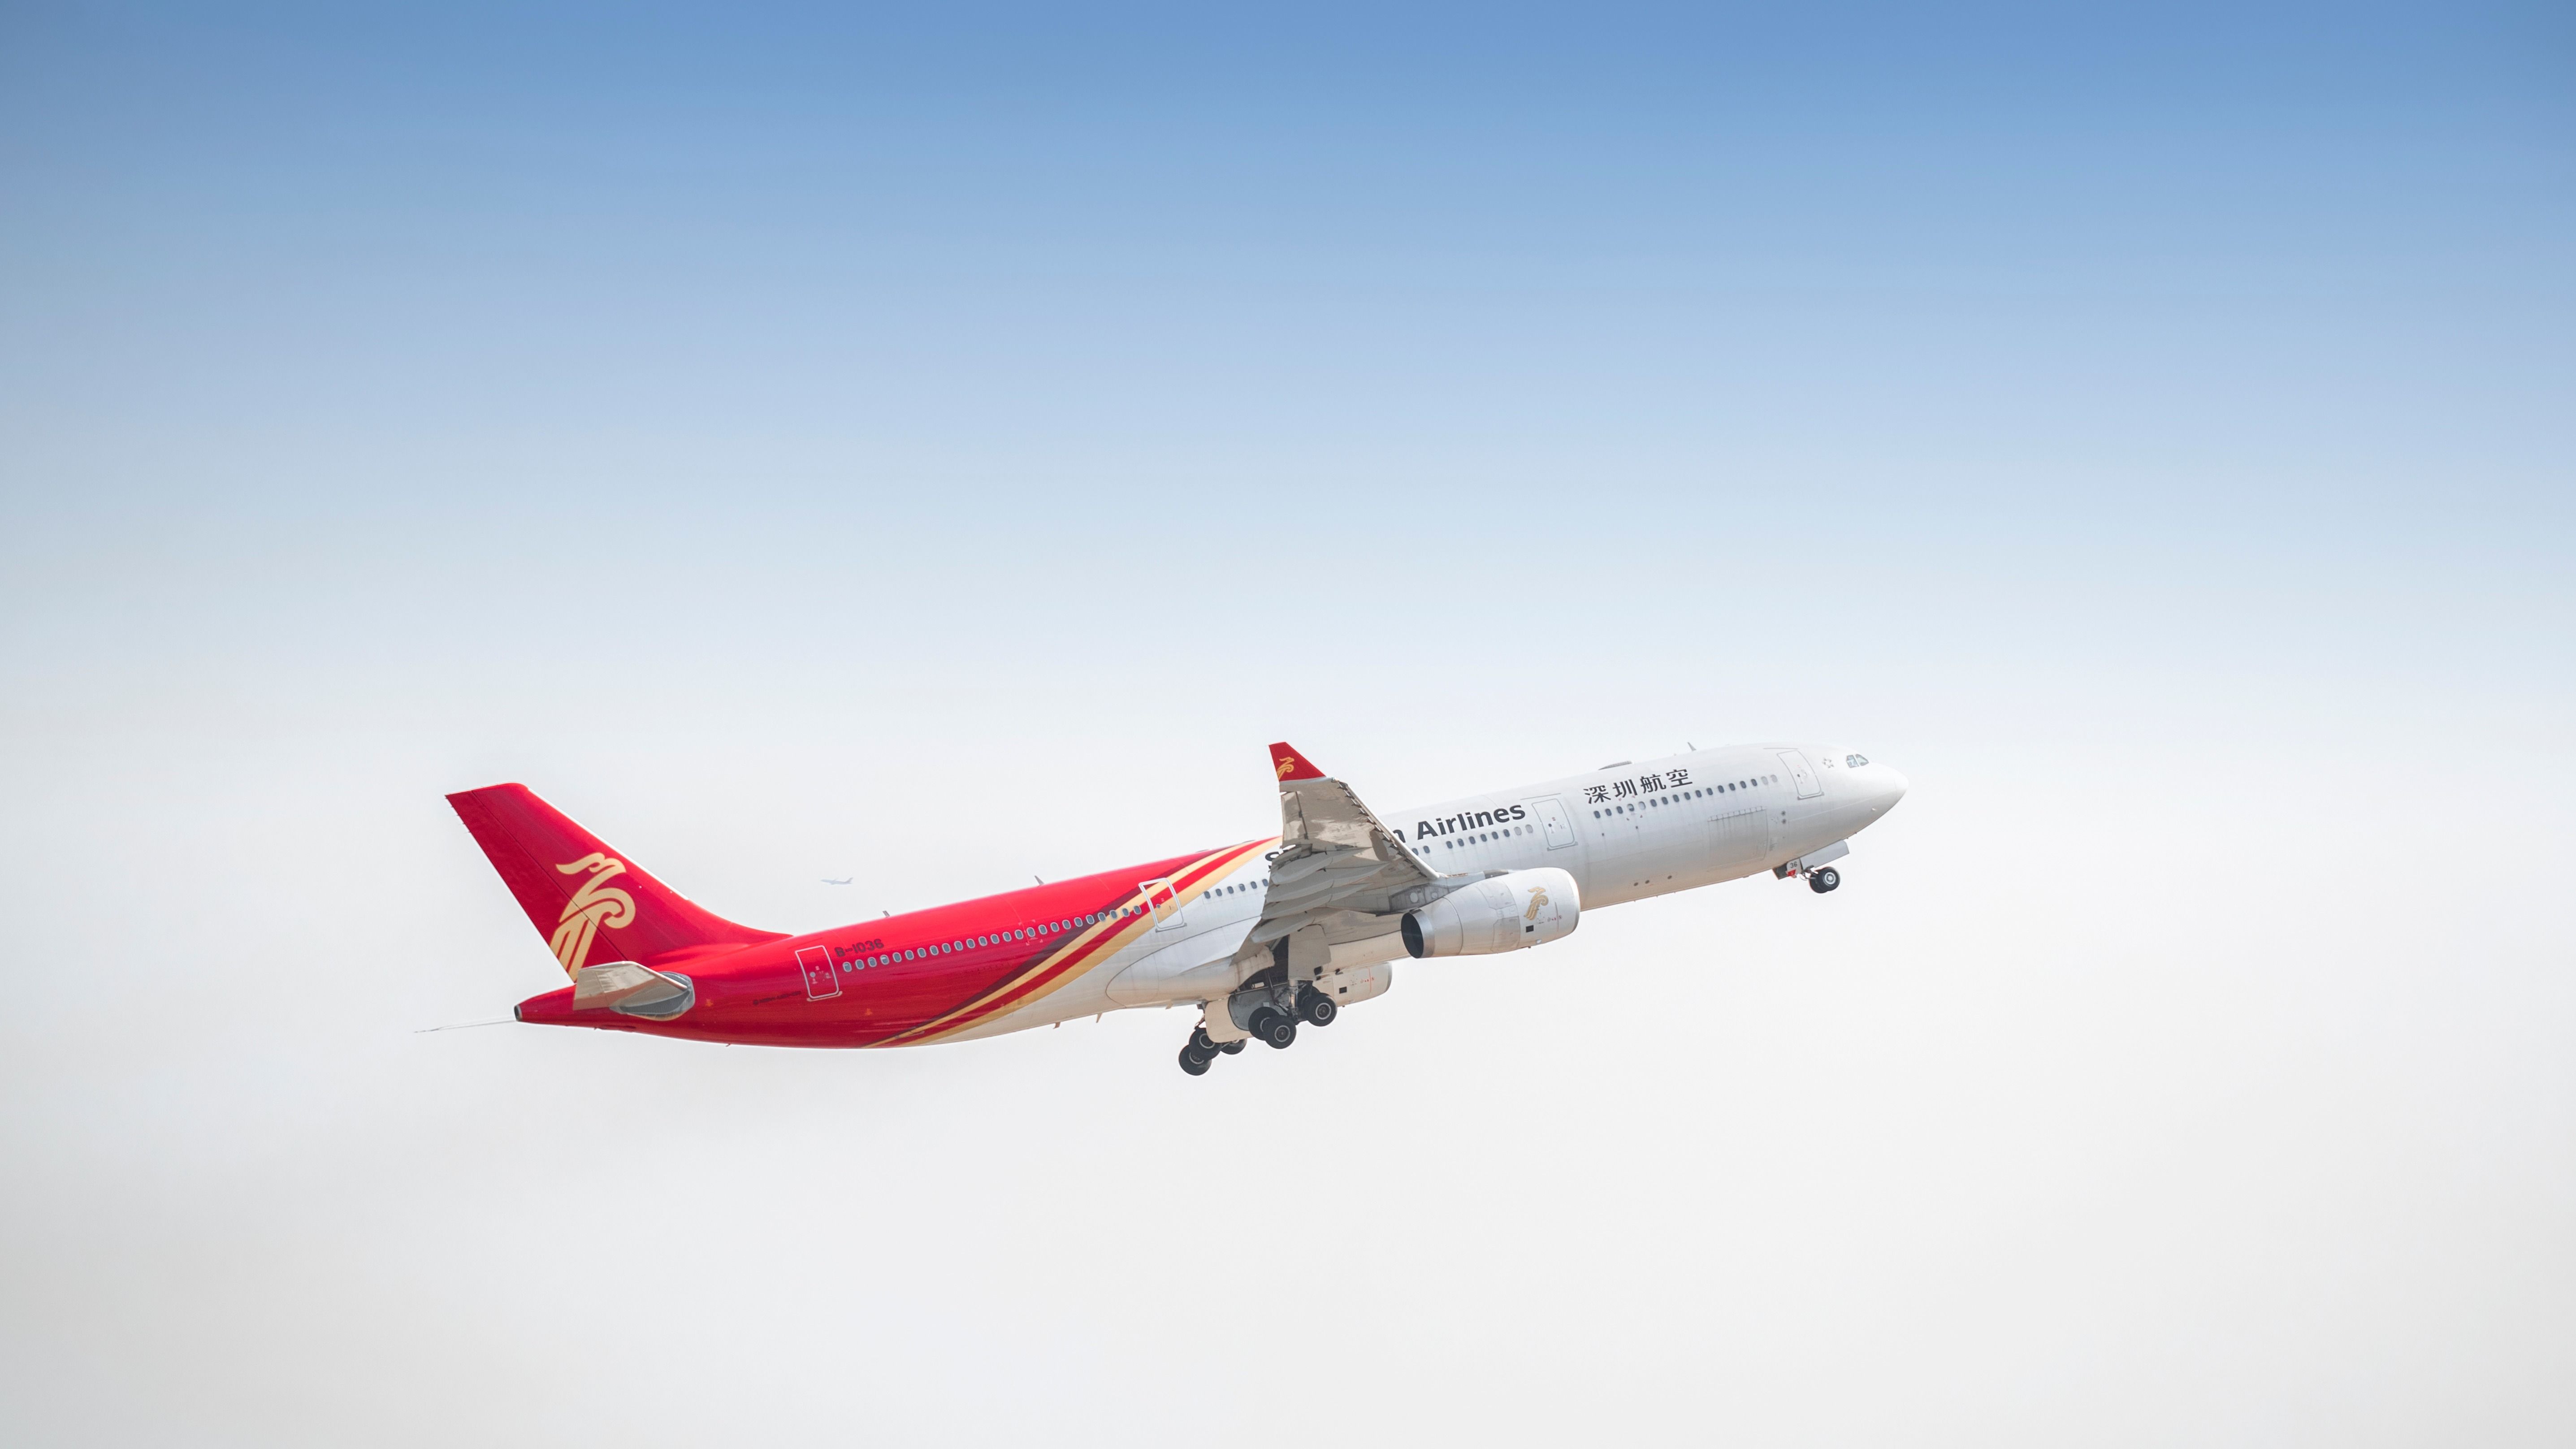 Shenzhen Airlines Airbus A330-300 taking off.